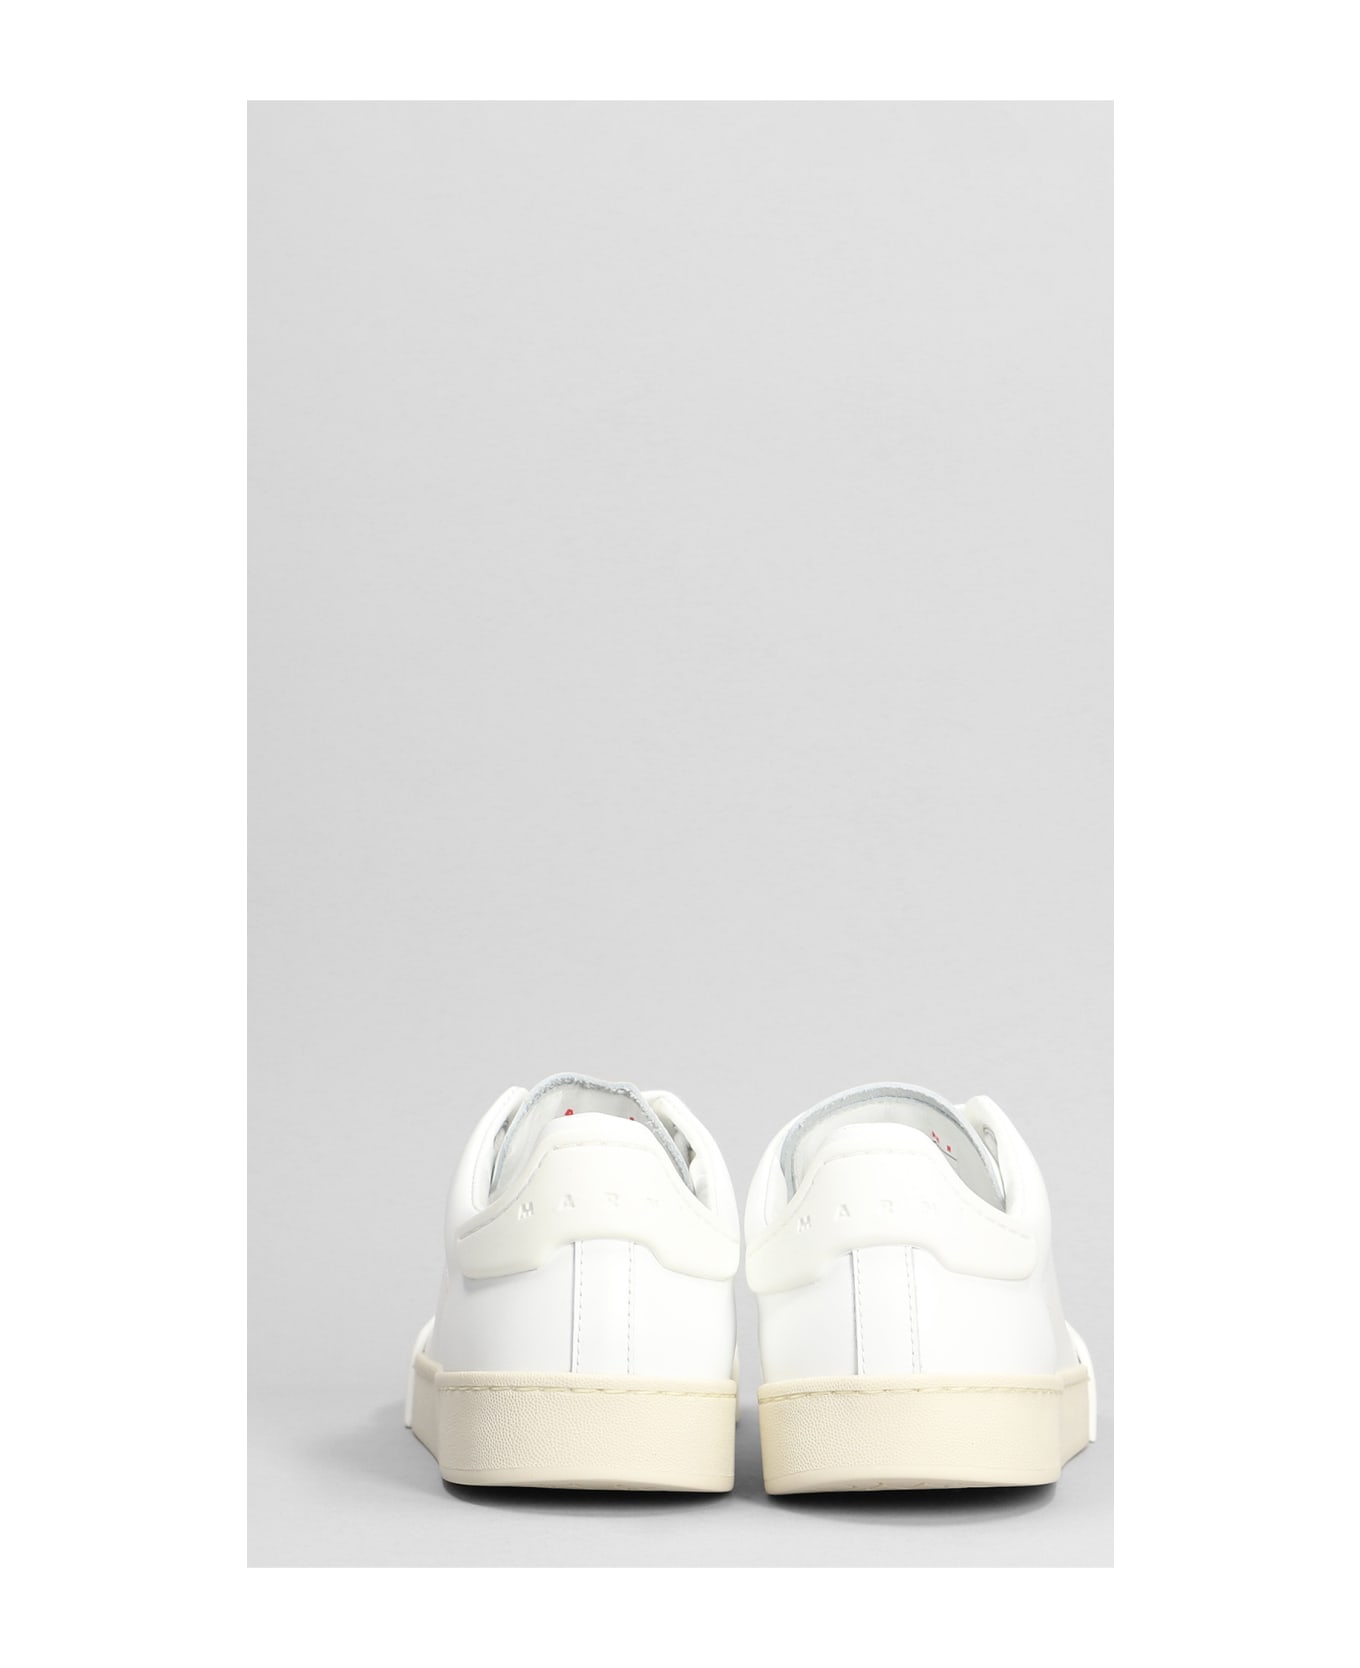 Marni Sneakers In White Leather - WHITE スニーカー